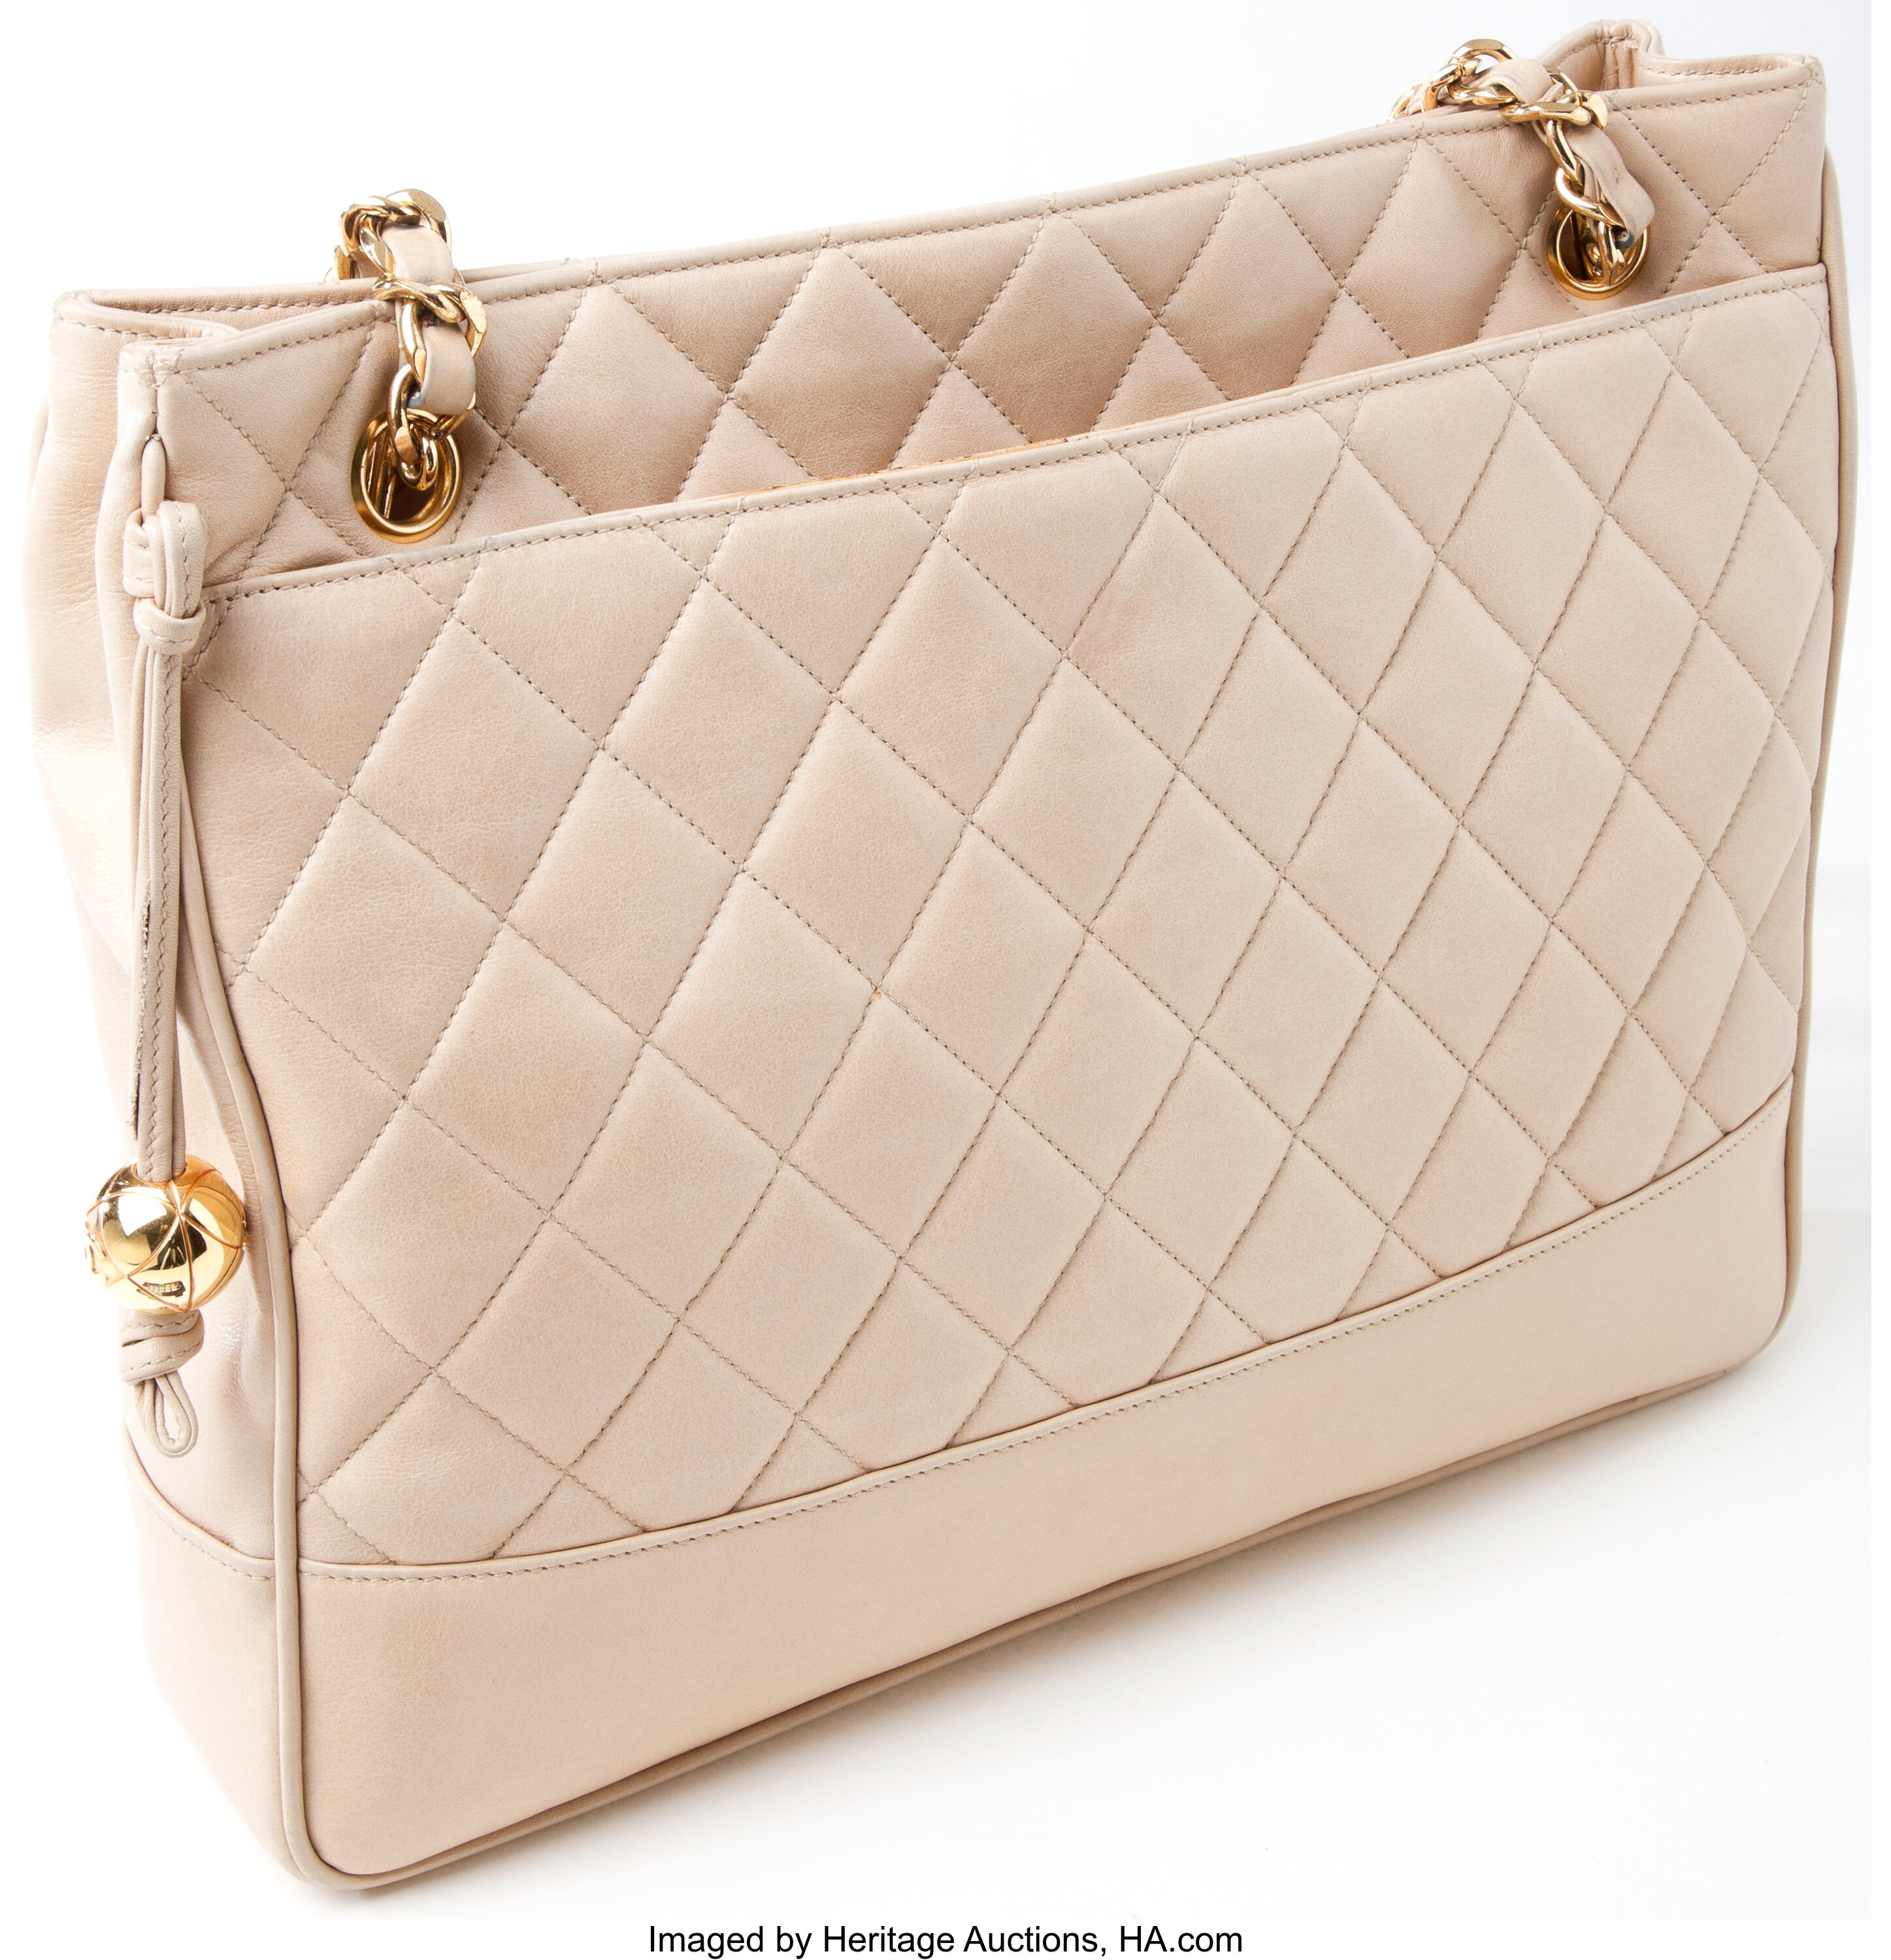 Timeless/classique leather handbag Chanel Beige in Leather - 33949310